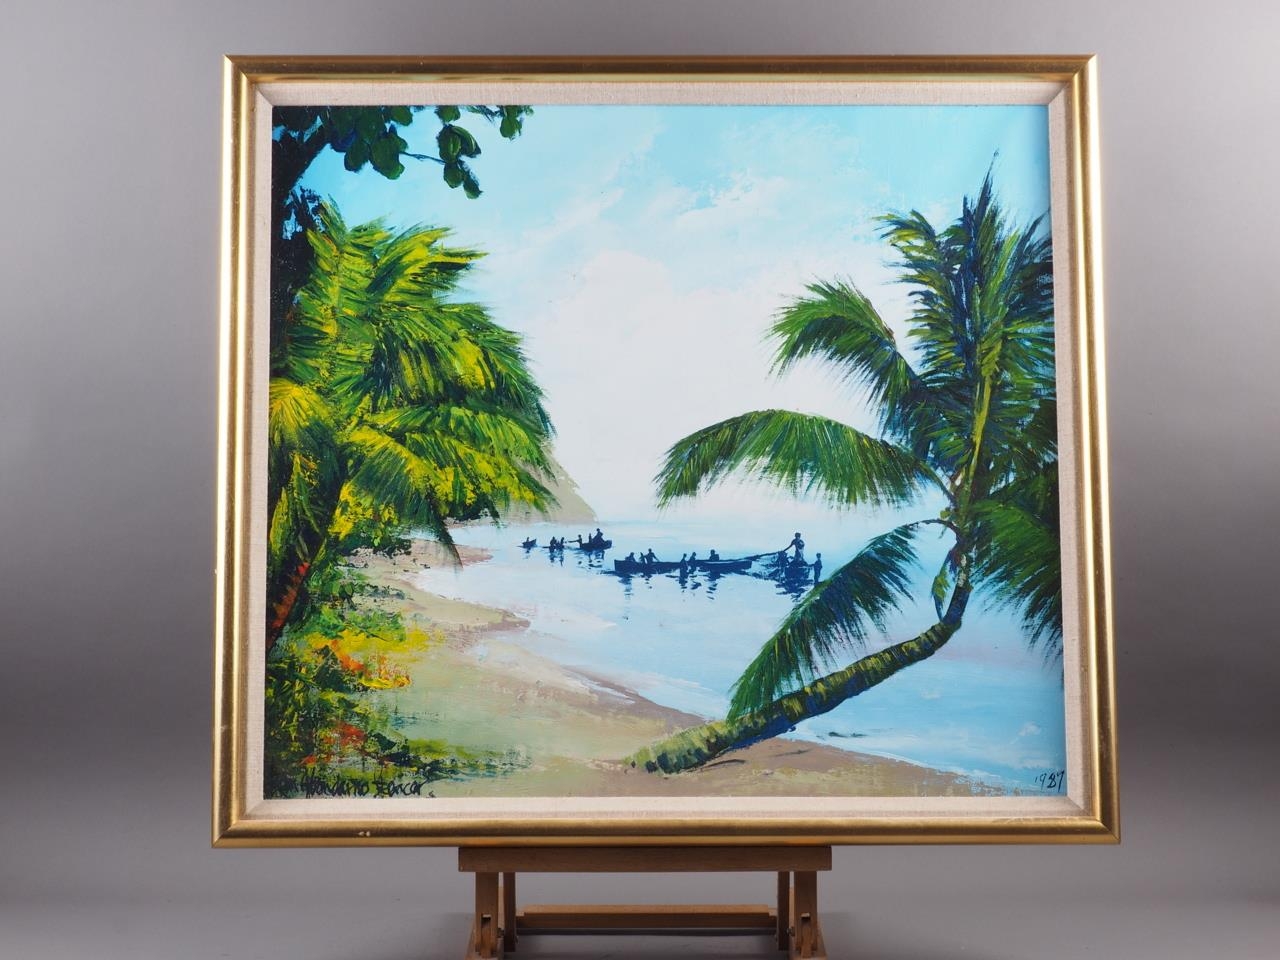 Kenneth Abendana Spencer: oil on canvas, Jamaican coastal scene with palm trees and boats, 23 1/4" x